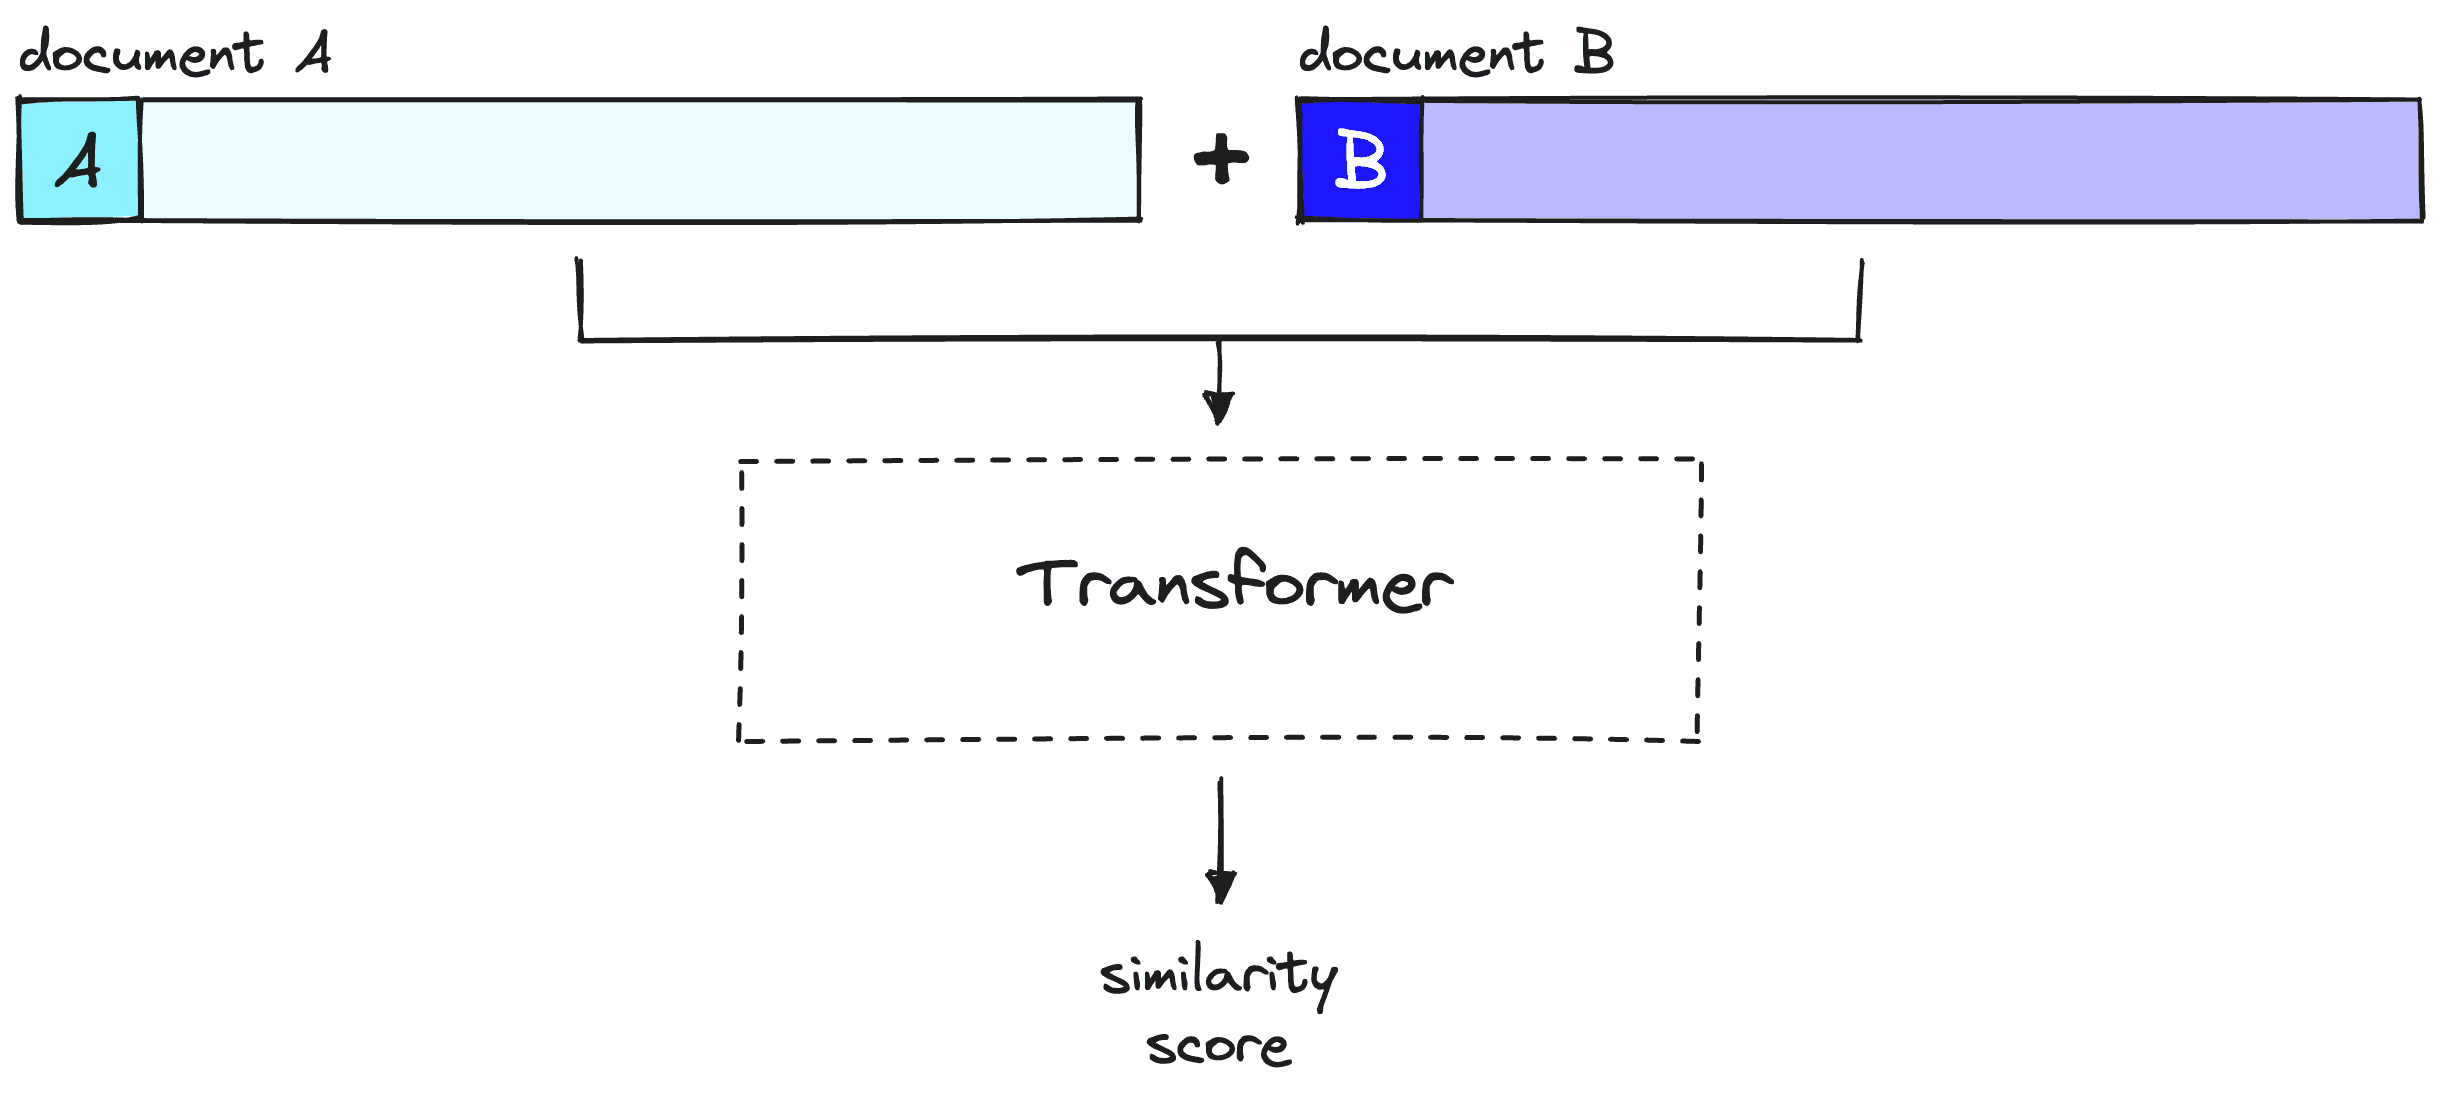 A reranker considers query and document to produce a single similarity score over a full transformer inference step. Note that document A below is equivalent to our query